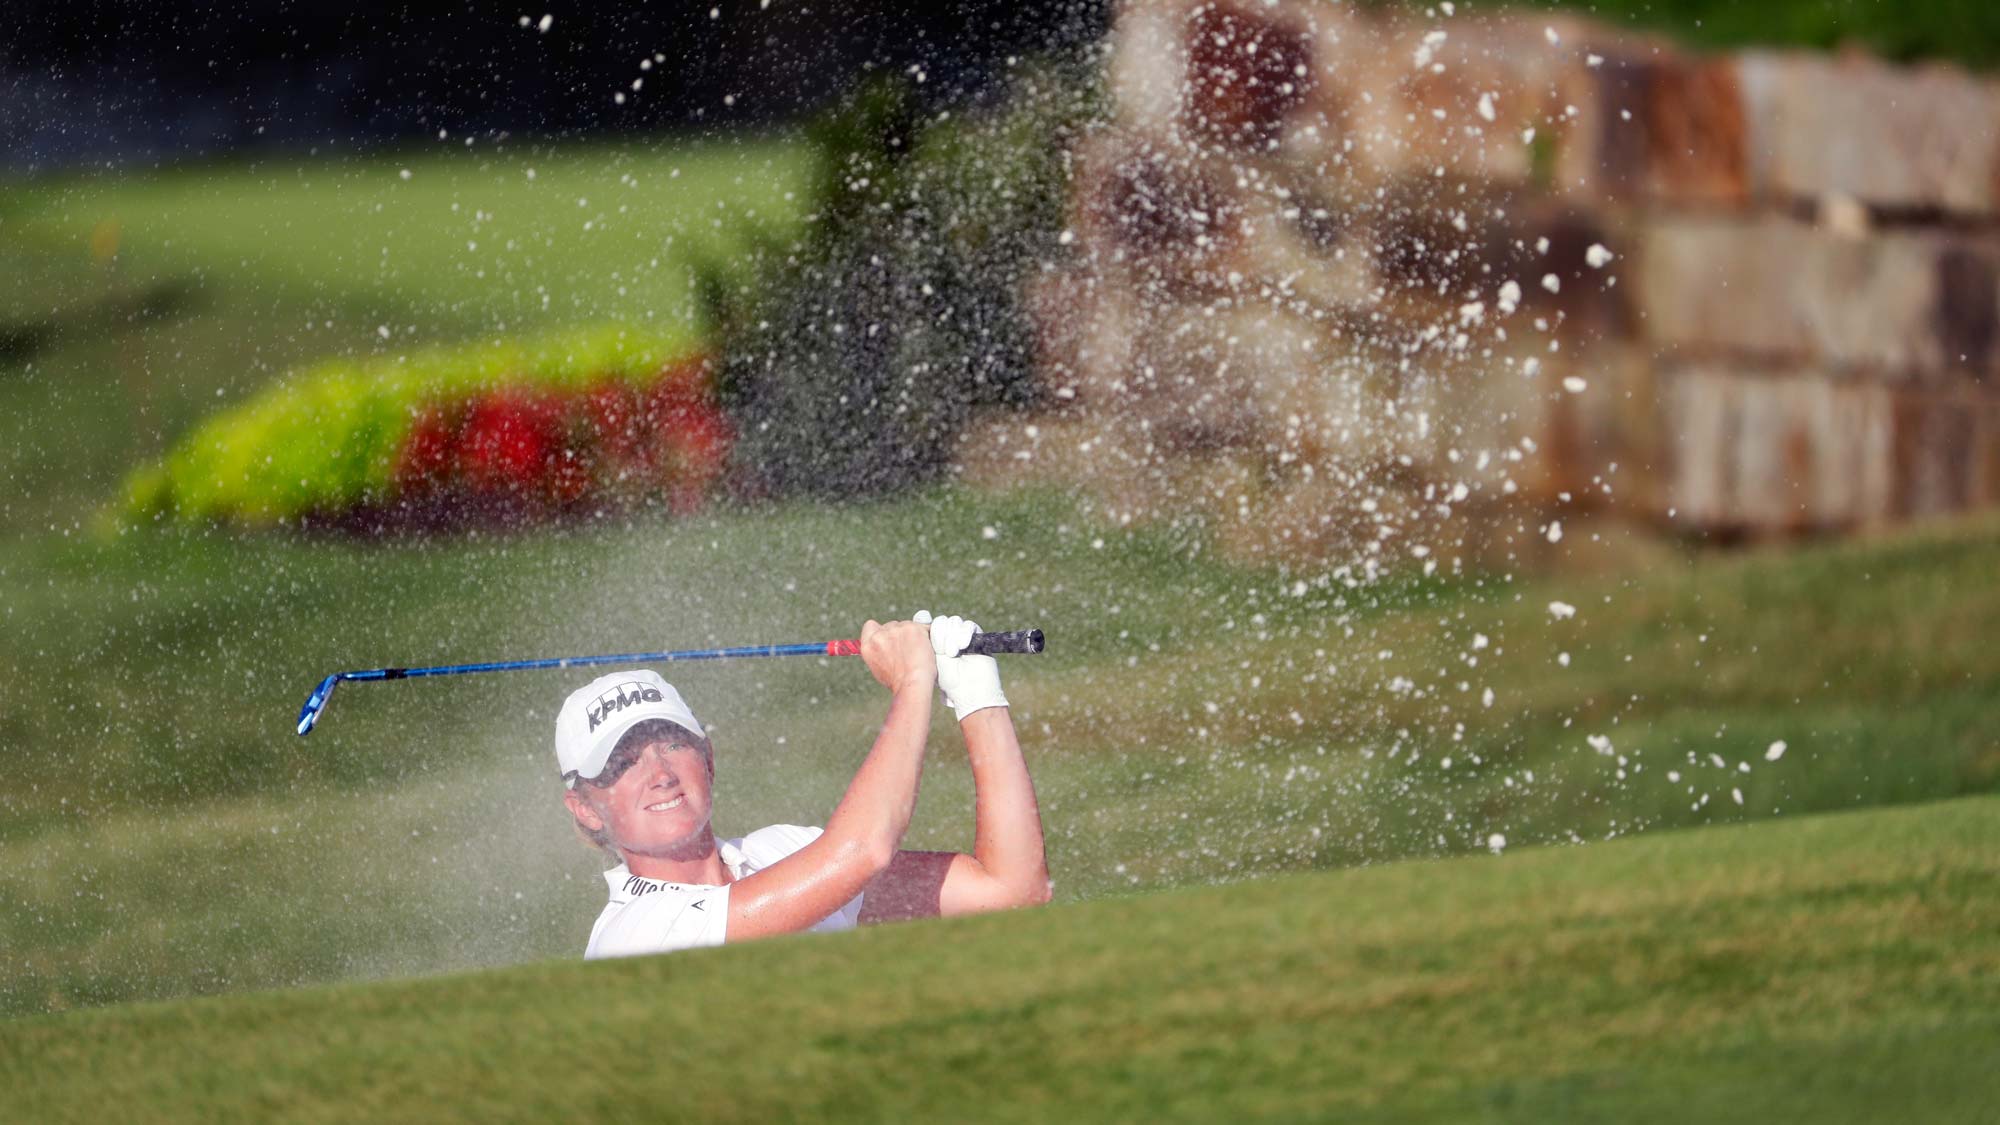 Stacy Lewis of the United States hits her third shot from a bunker on the 18th hole during the second round of the Walmart NW Arkansas Championship